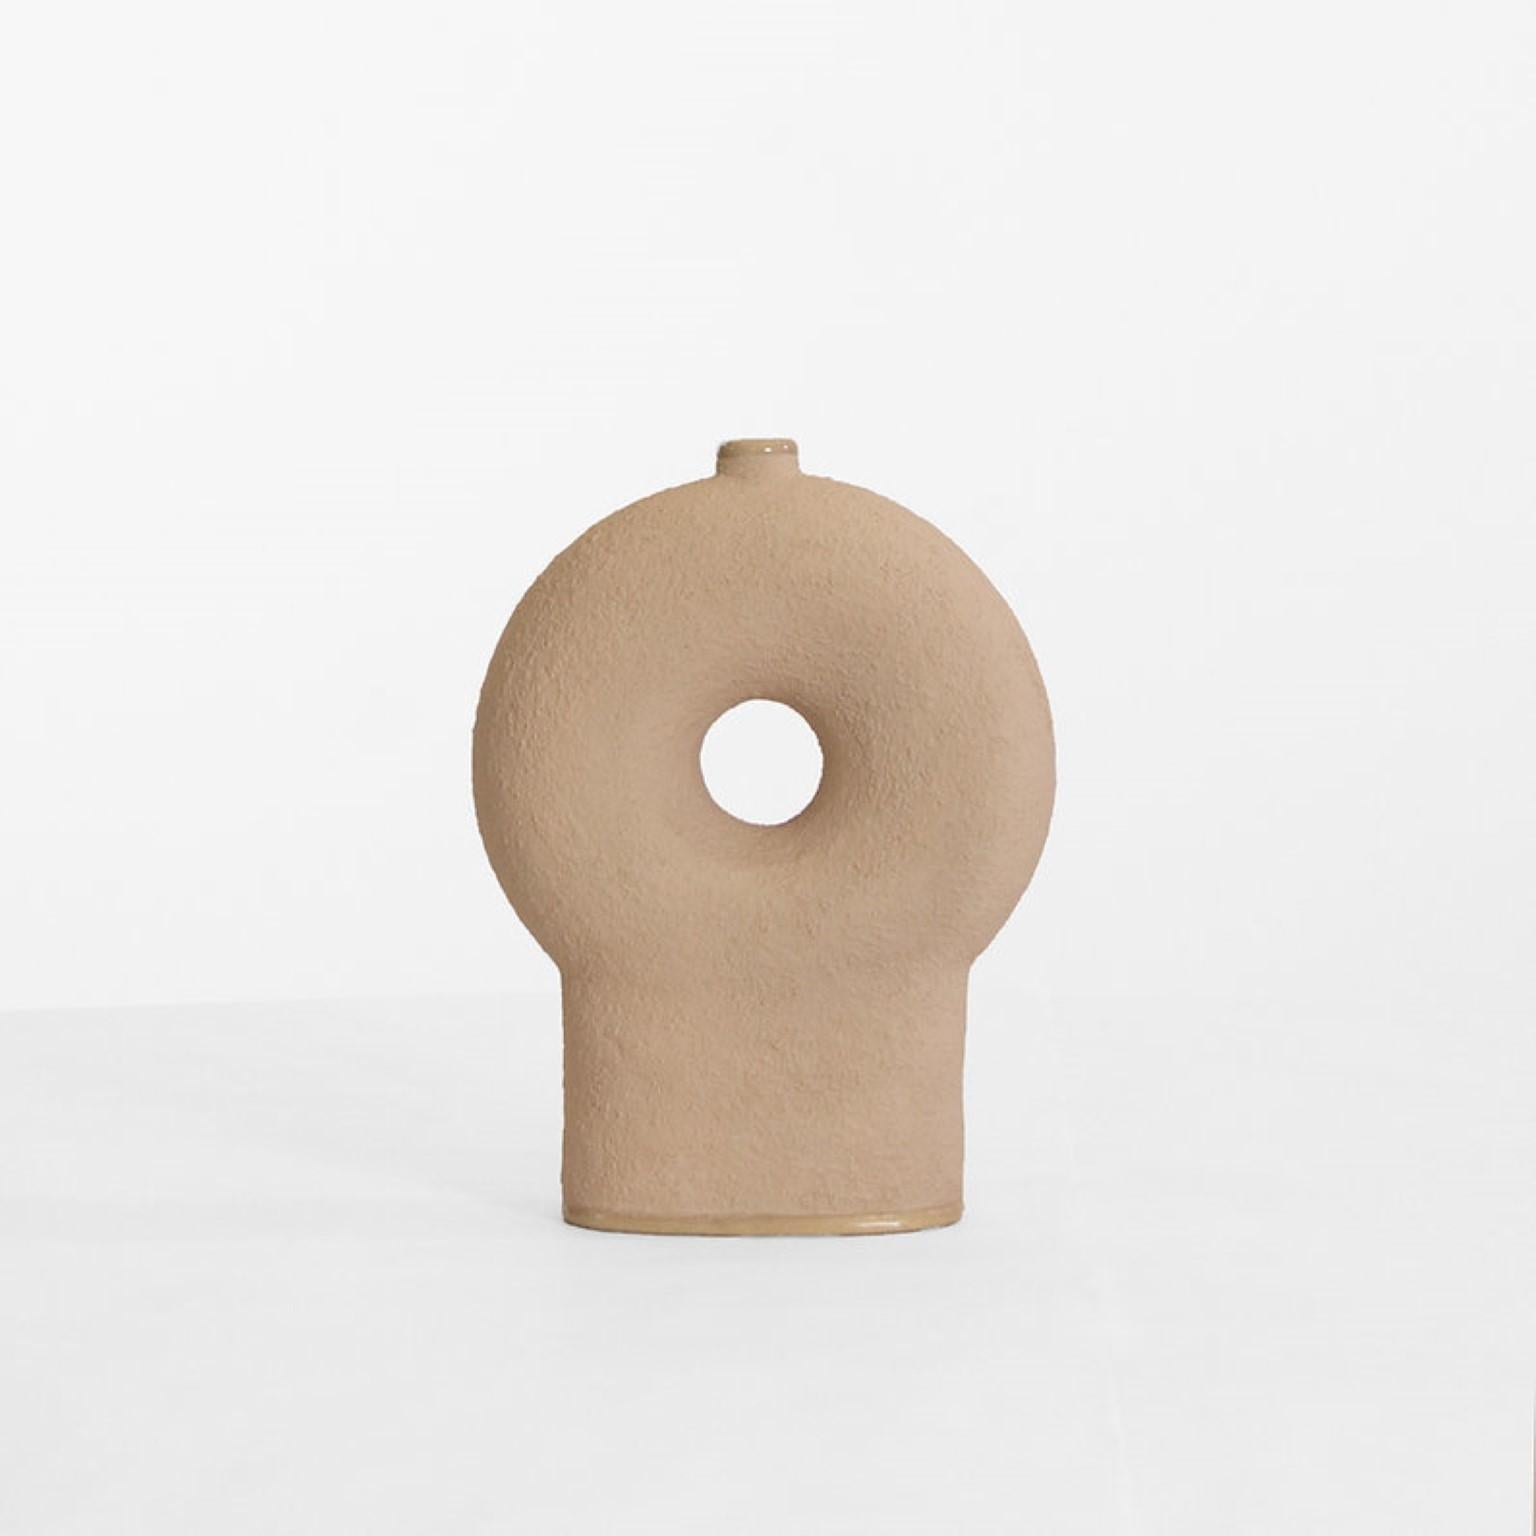 One leg ceramic vase by Faina.
Design: Victoriya Yakusha
Materials: ceramic.
Dimensions: L 24 x W 12 x H 33 cm.

In search of new-old design messages, Victoria Yakusha conducted a study of the daily traditions of our ancestors. The times of